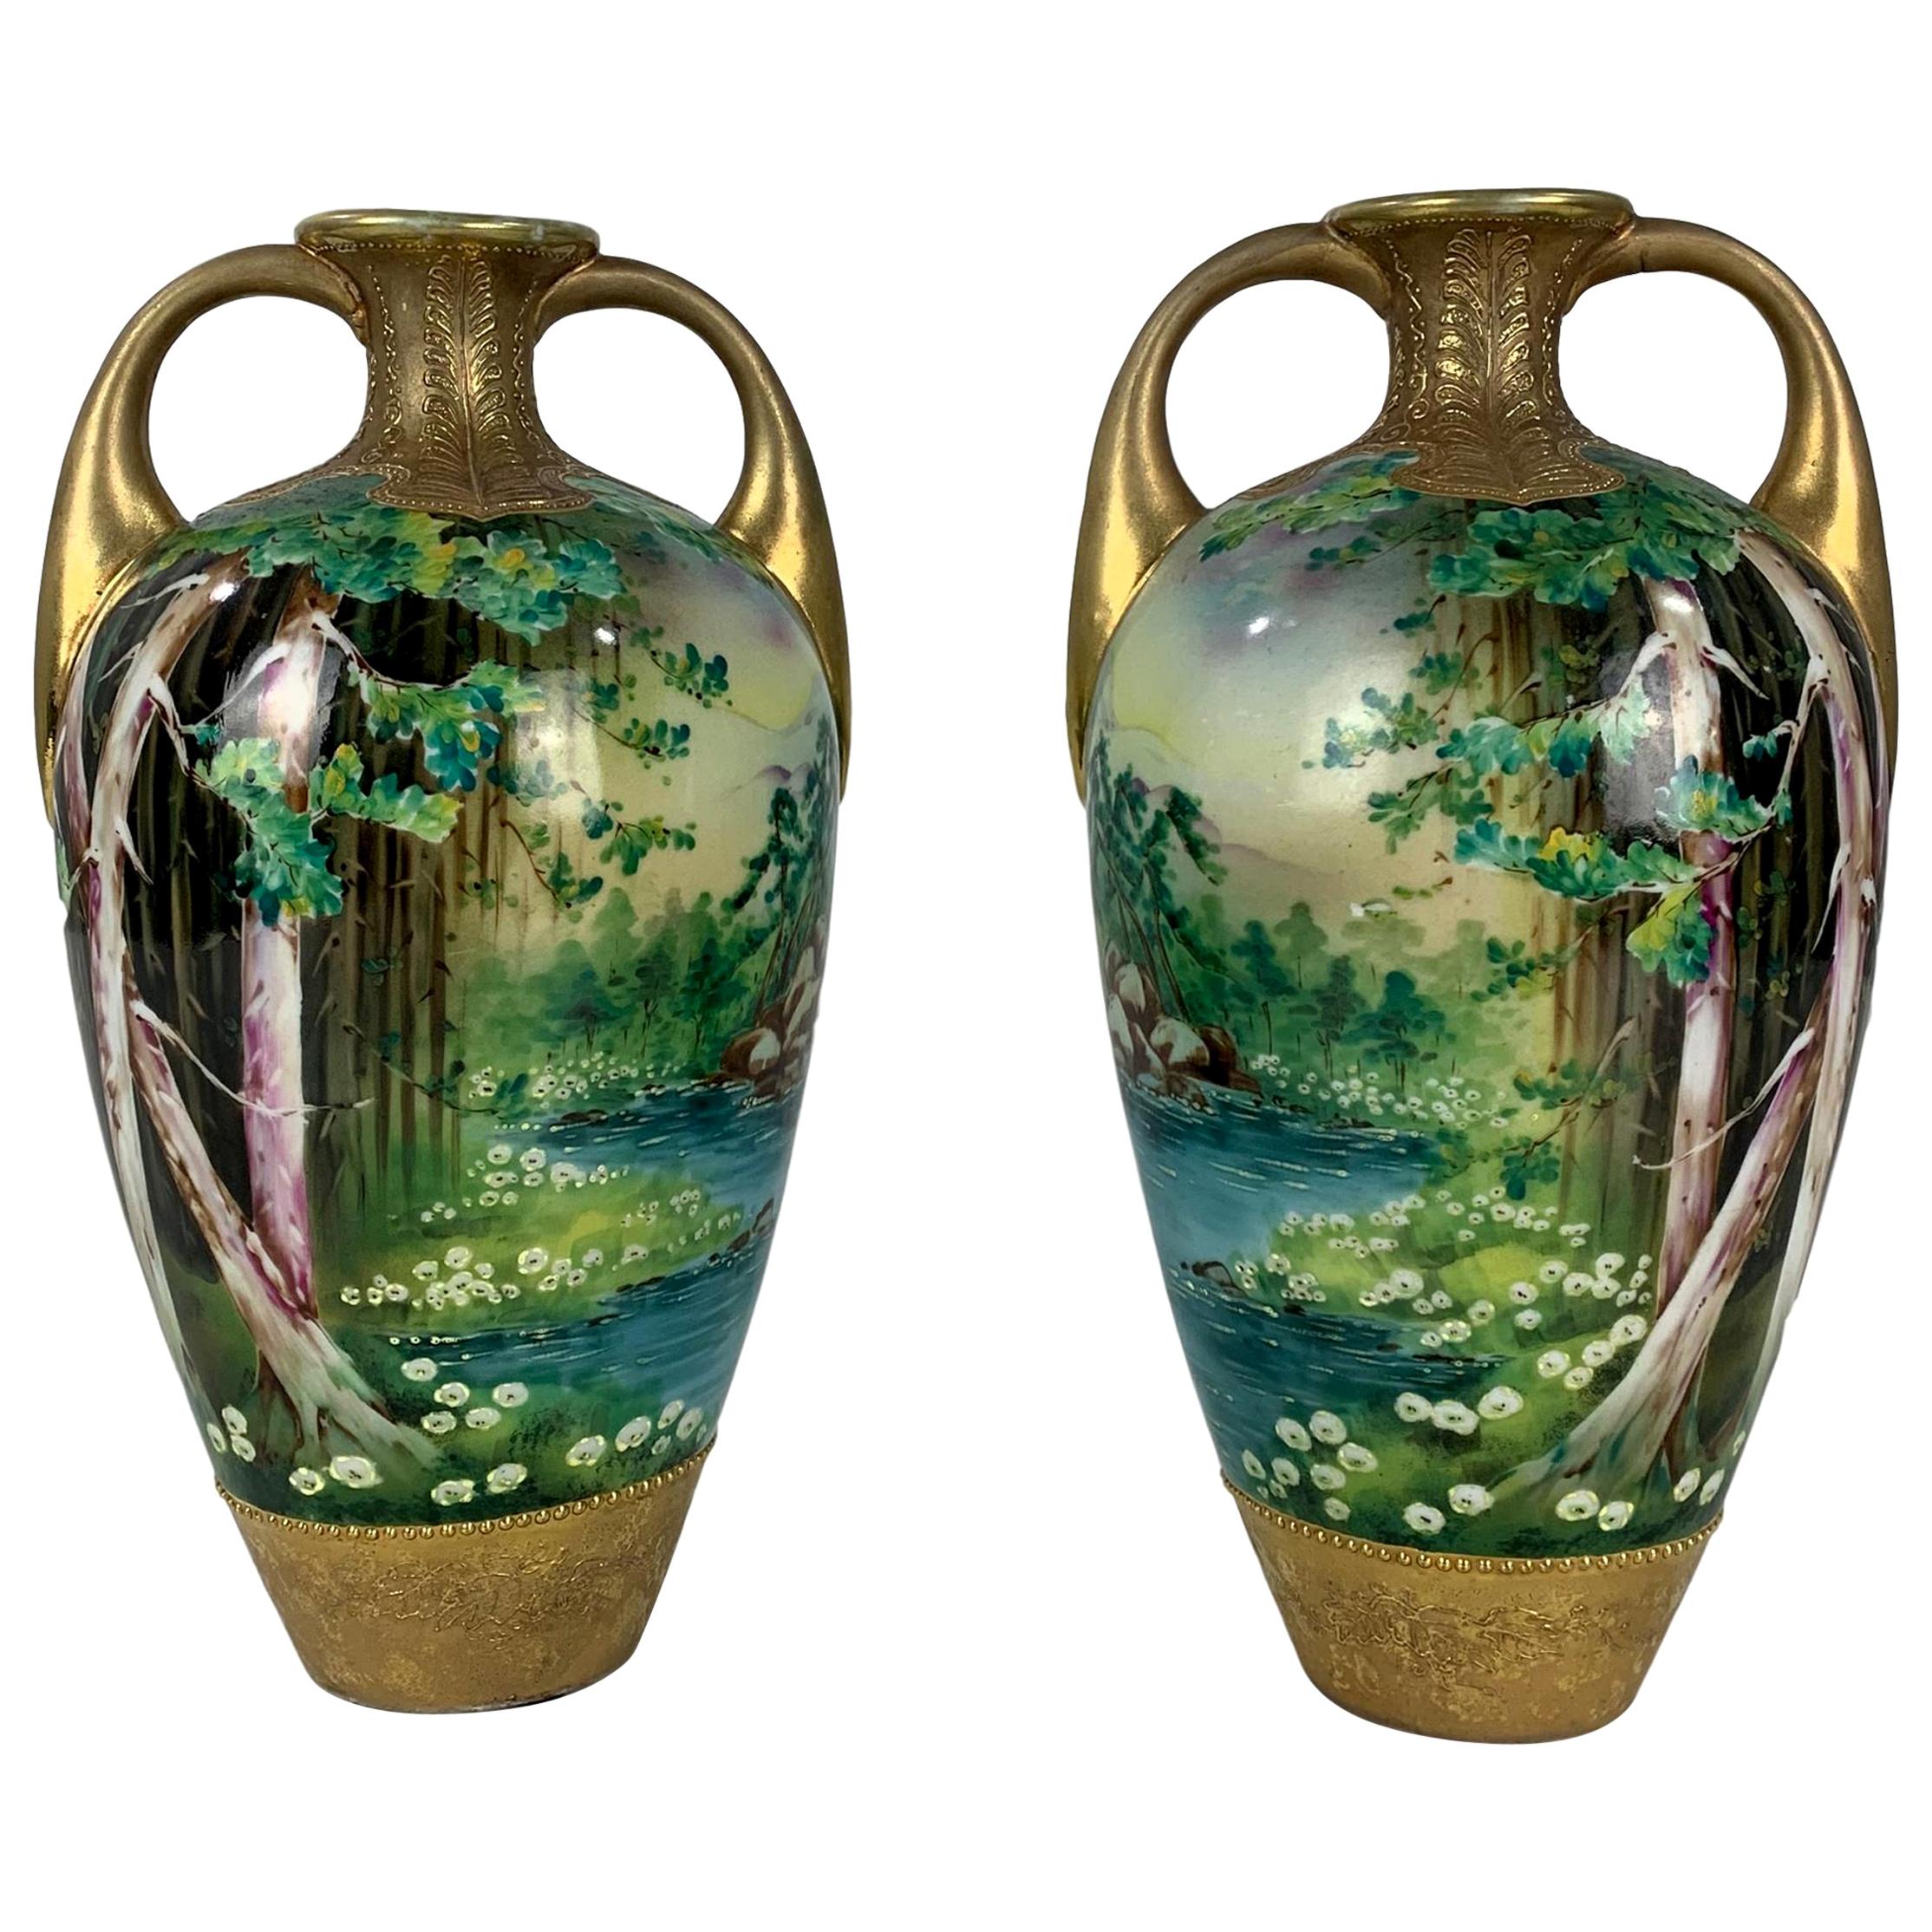 Mirrored Pair of Hand Painted Antique Nippon Vases